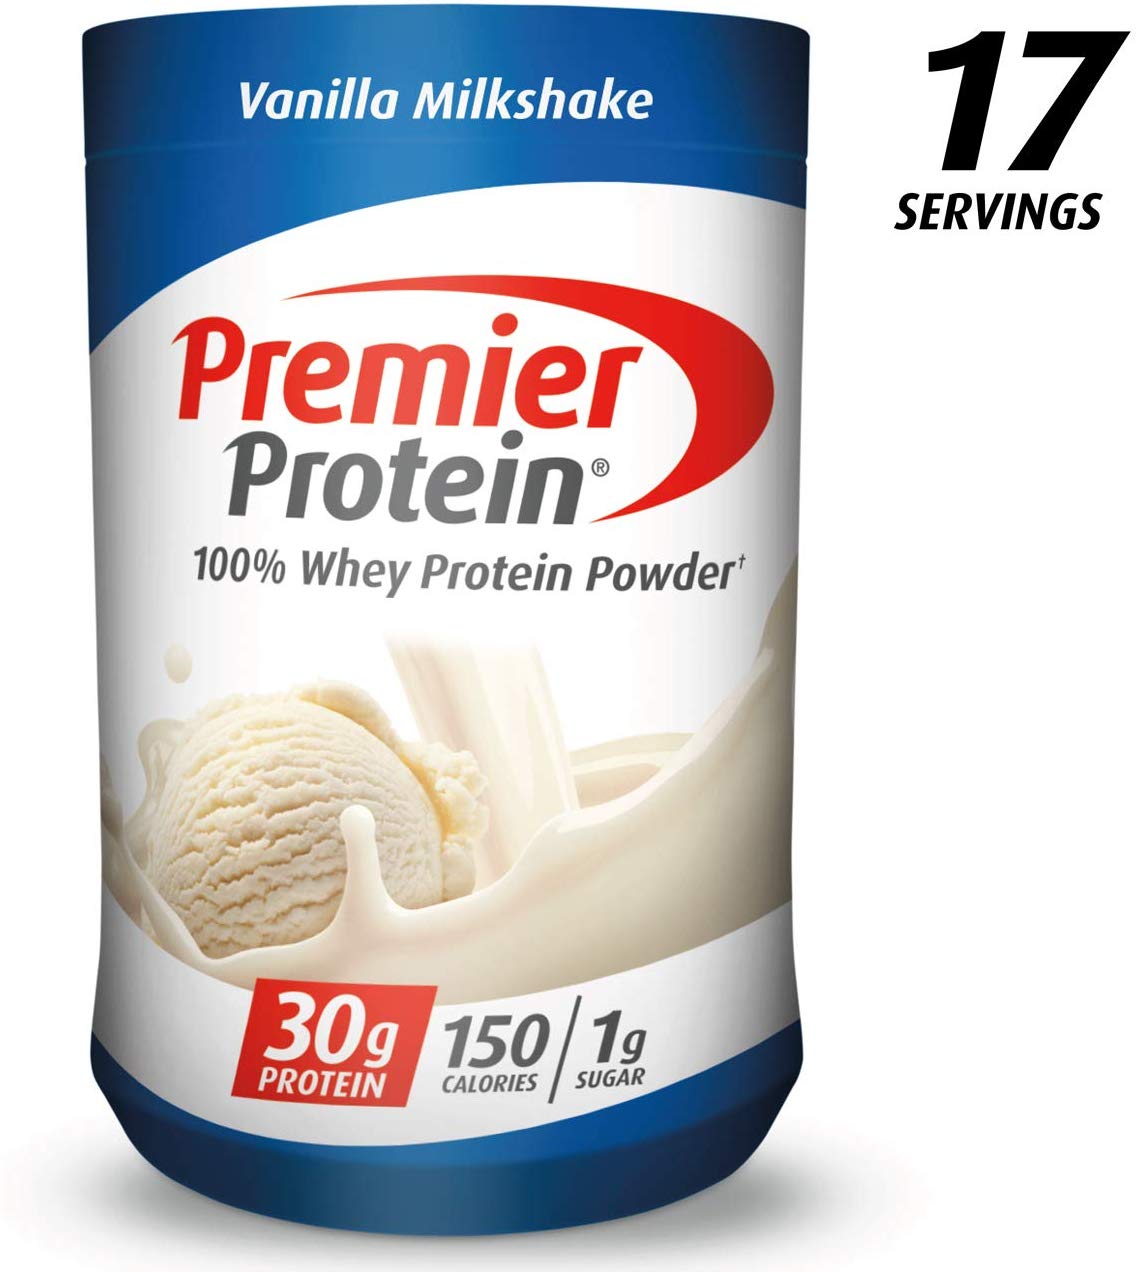 Premier Protein Whey Protein Powder, Vanilla, Packaging may Vary (17 Servings) $10.29 (REG $29.99)